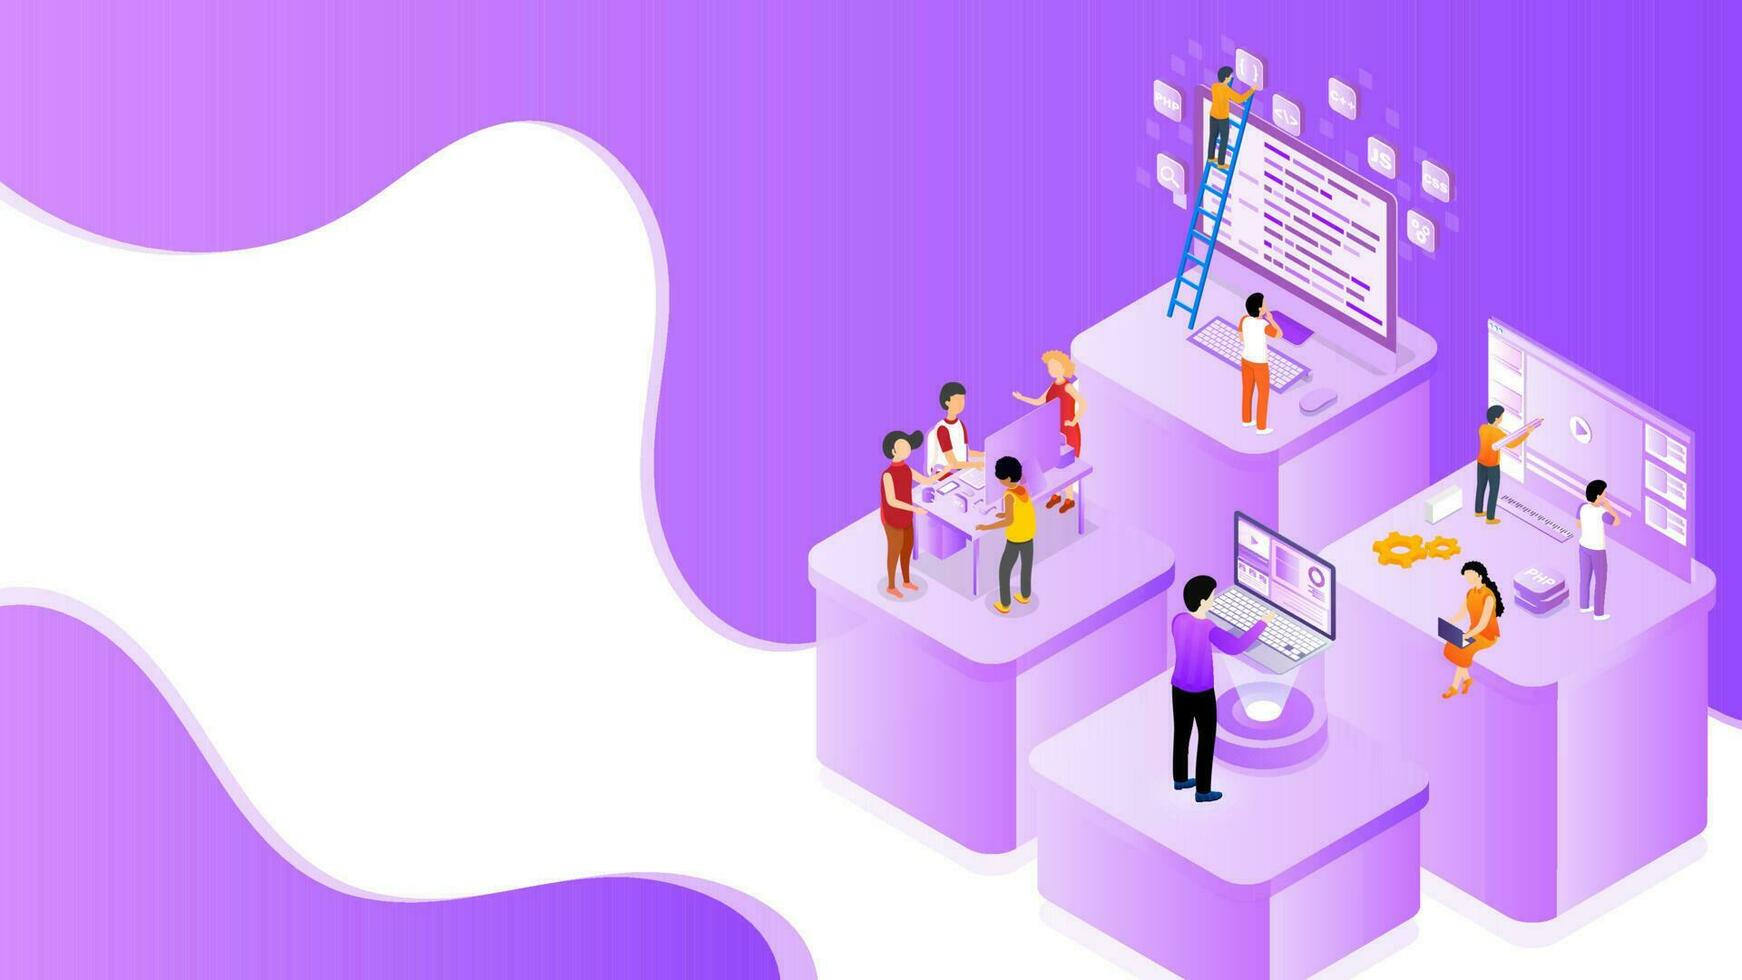 Business people working different platform in level position for Teamwork concept based isometric design. Can be used as banner or poster design. vector